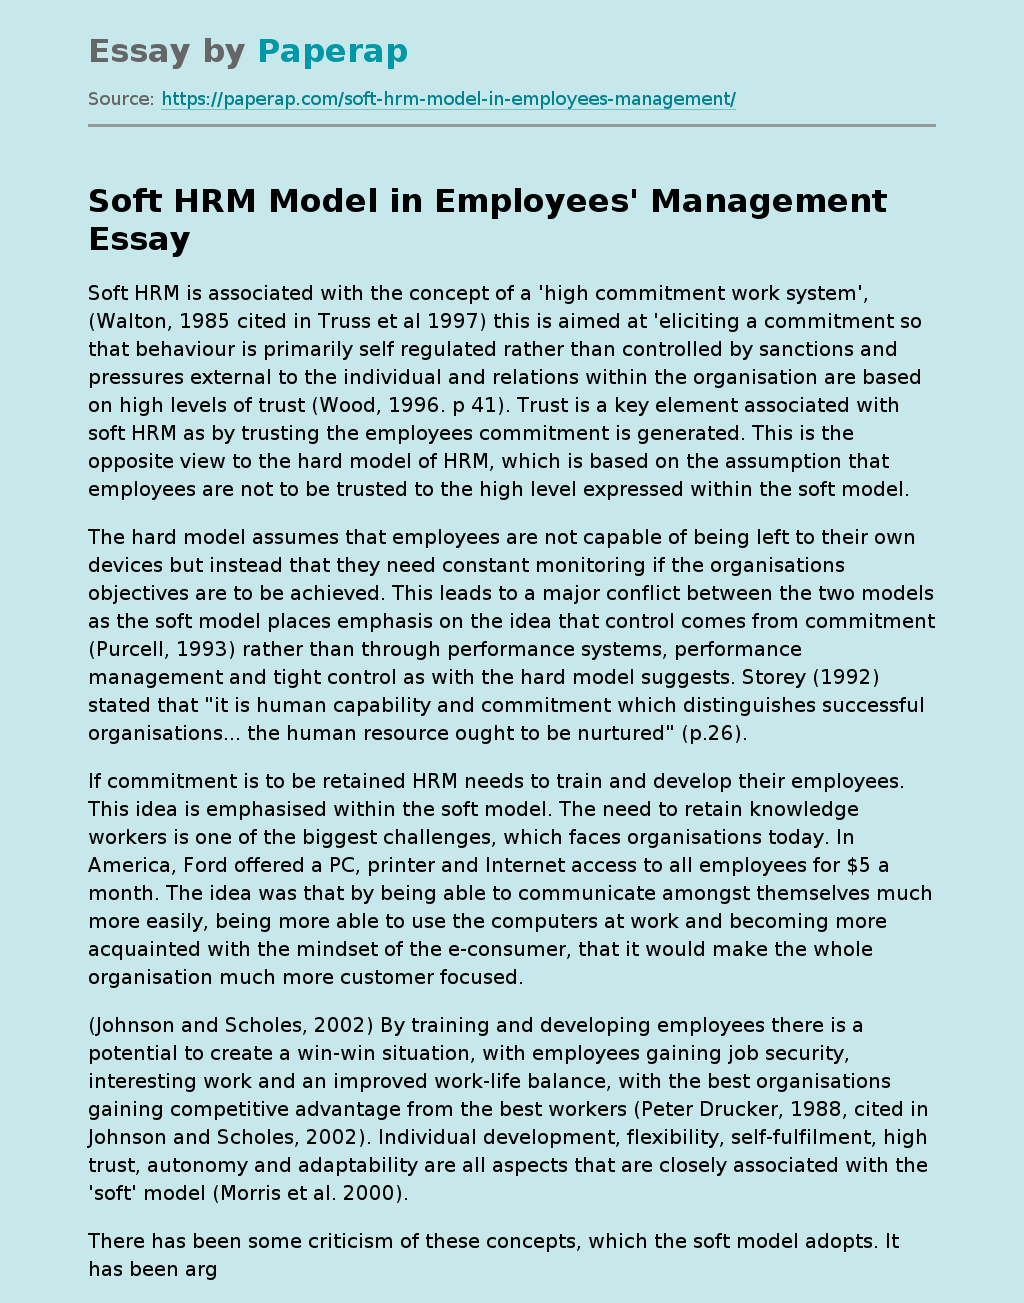 "Soft" HRM Model in Employees' Management